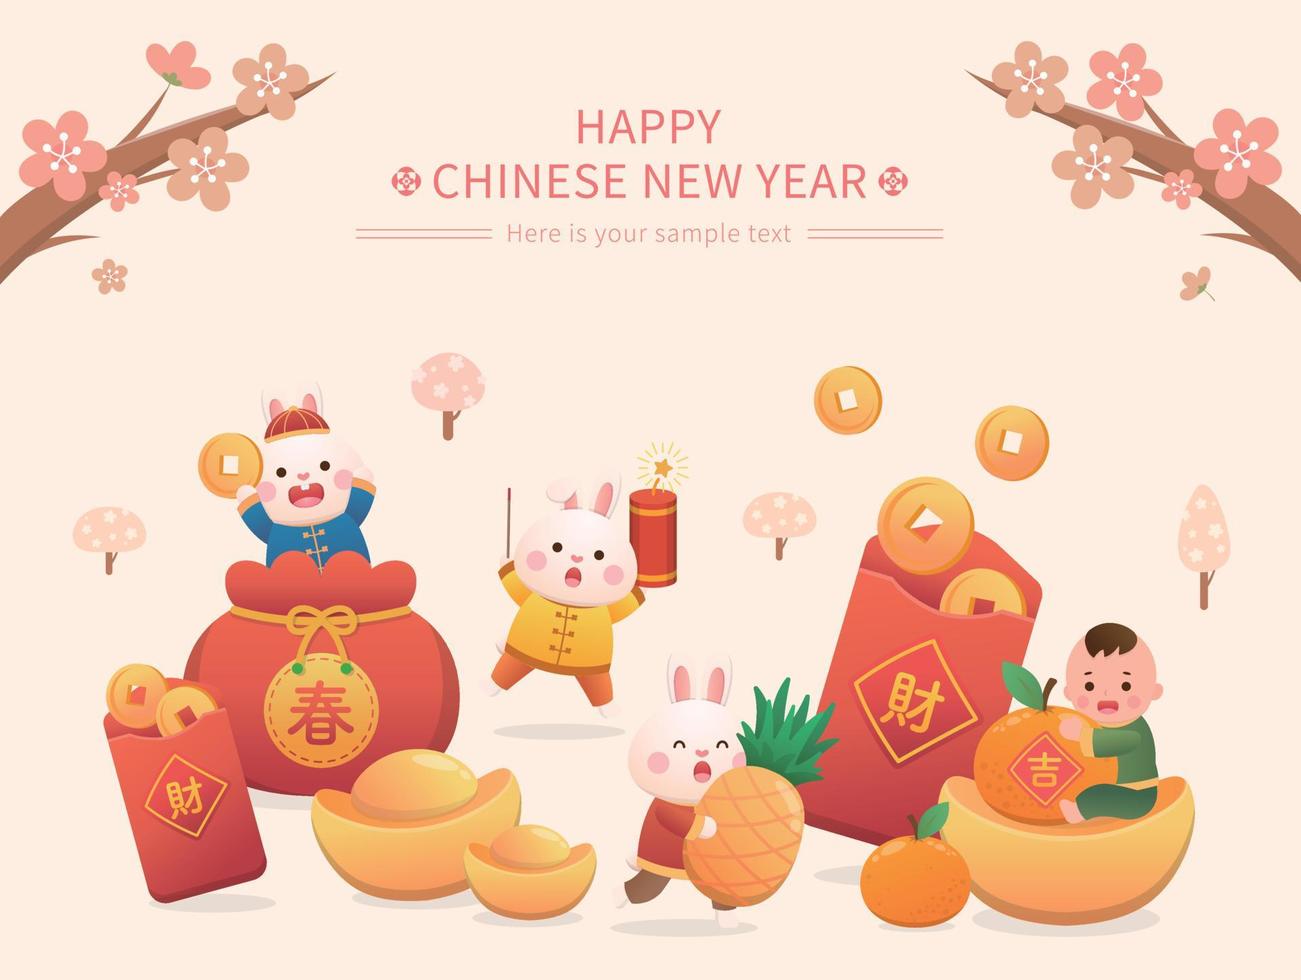 Poster for Chinese New Year, cute rabbit character or mascot, red paper bag or coin or gold ingot, new year elements vector